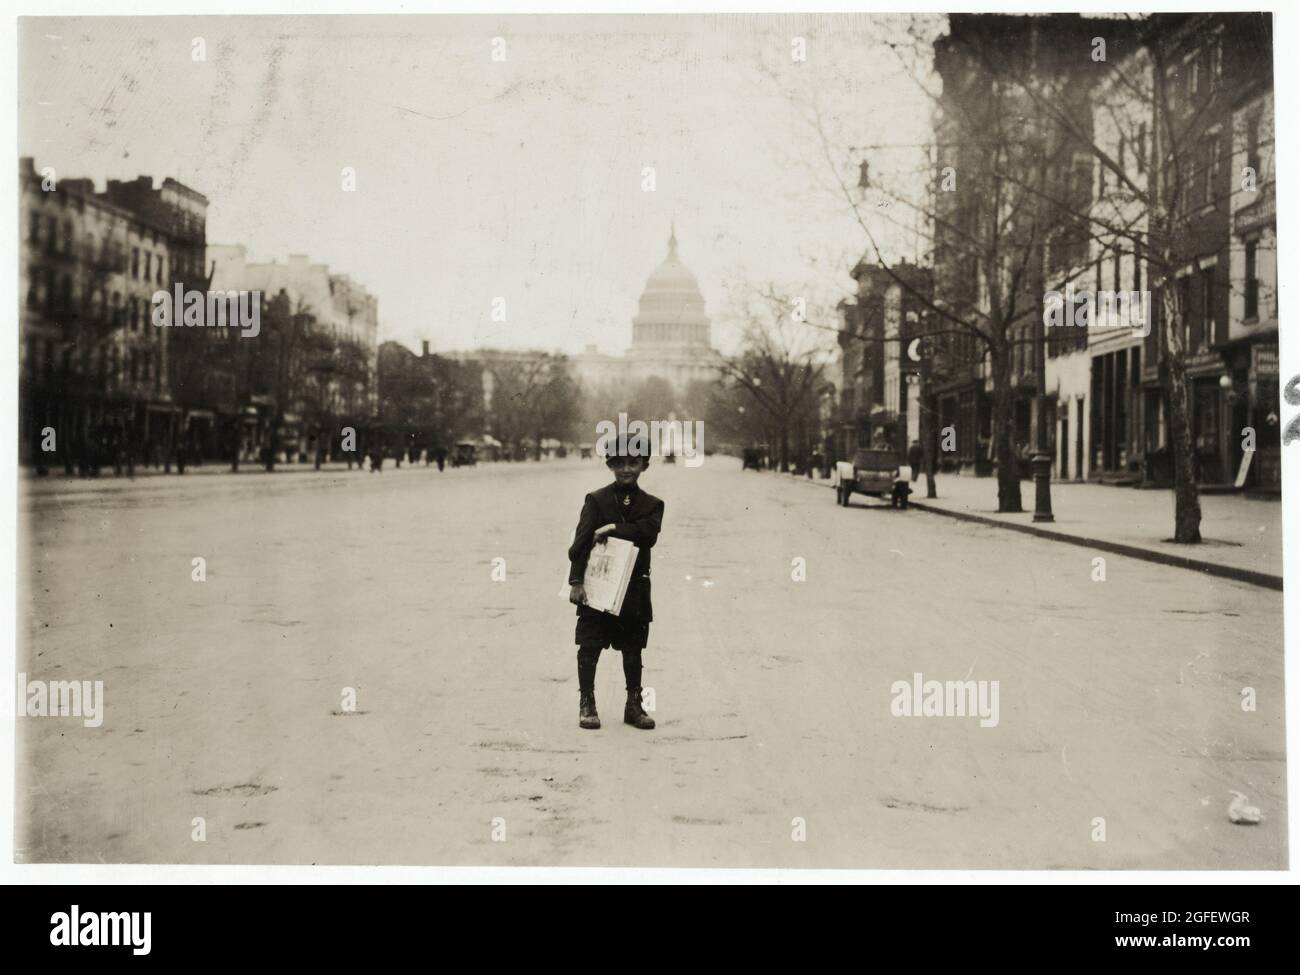 Sunday. 7 yr. old news-boy – 1912 April – Photo by Lewis Hine. United States Capitol in the background / Washington DC. Stock Photo